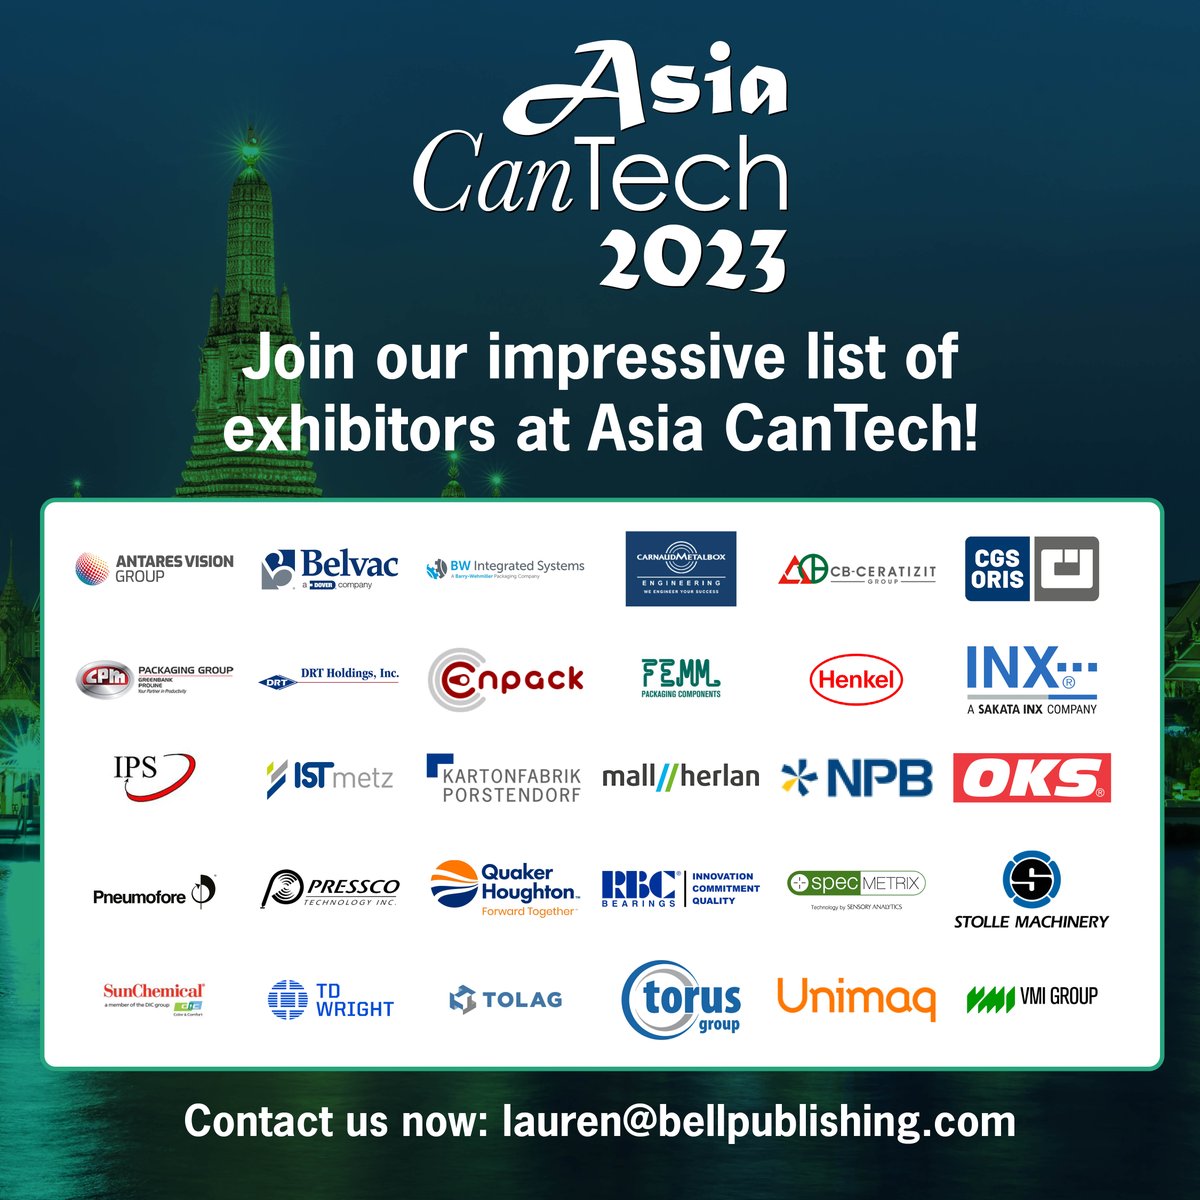 Join our impressive list of exhibitors for Asia CanTech 2023!

Please email lauren@bellpublishing.com or register via the link bit.ly/3IQxtJI 

#asiacantech #asiacantech2023 #metalpackaging #events #canmakers